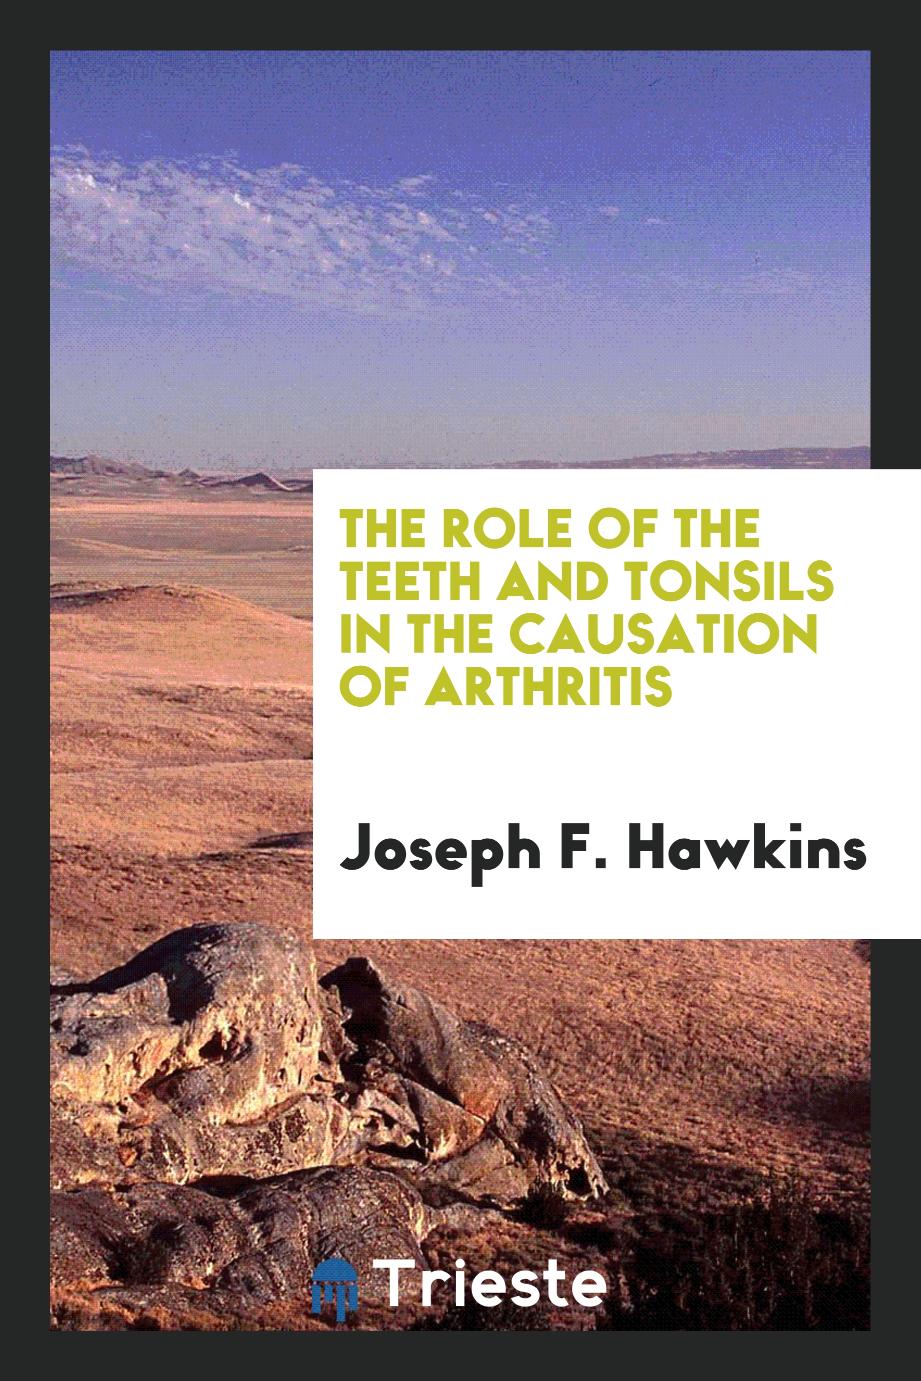 The Role of the Teeth and Tonsils in the Causation of Arthritis